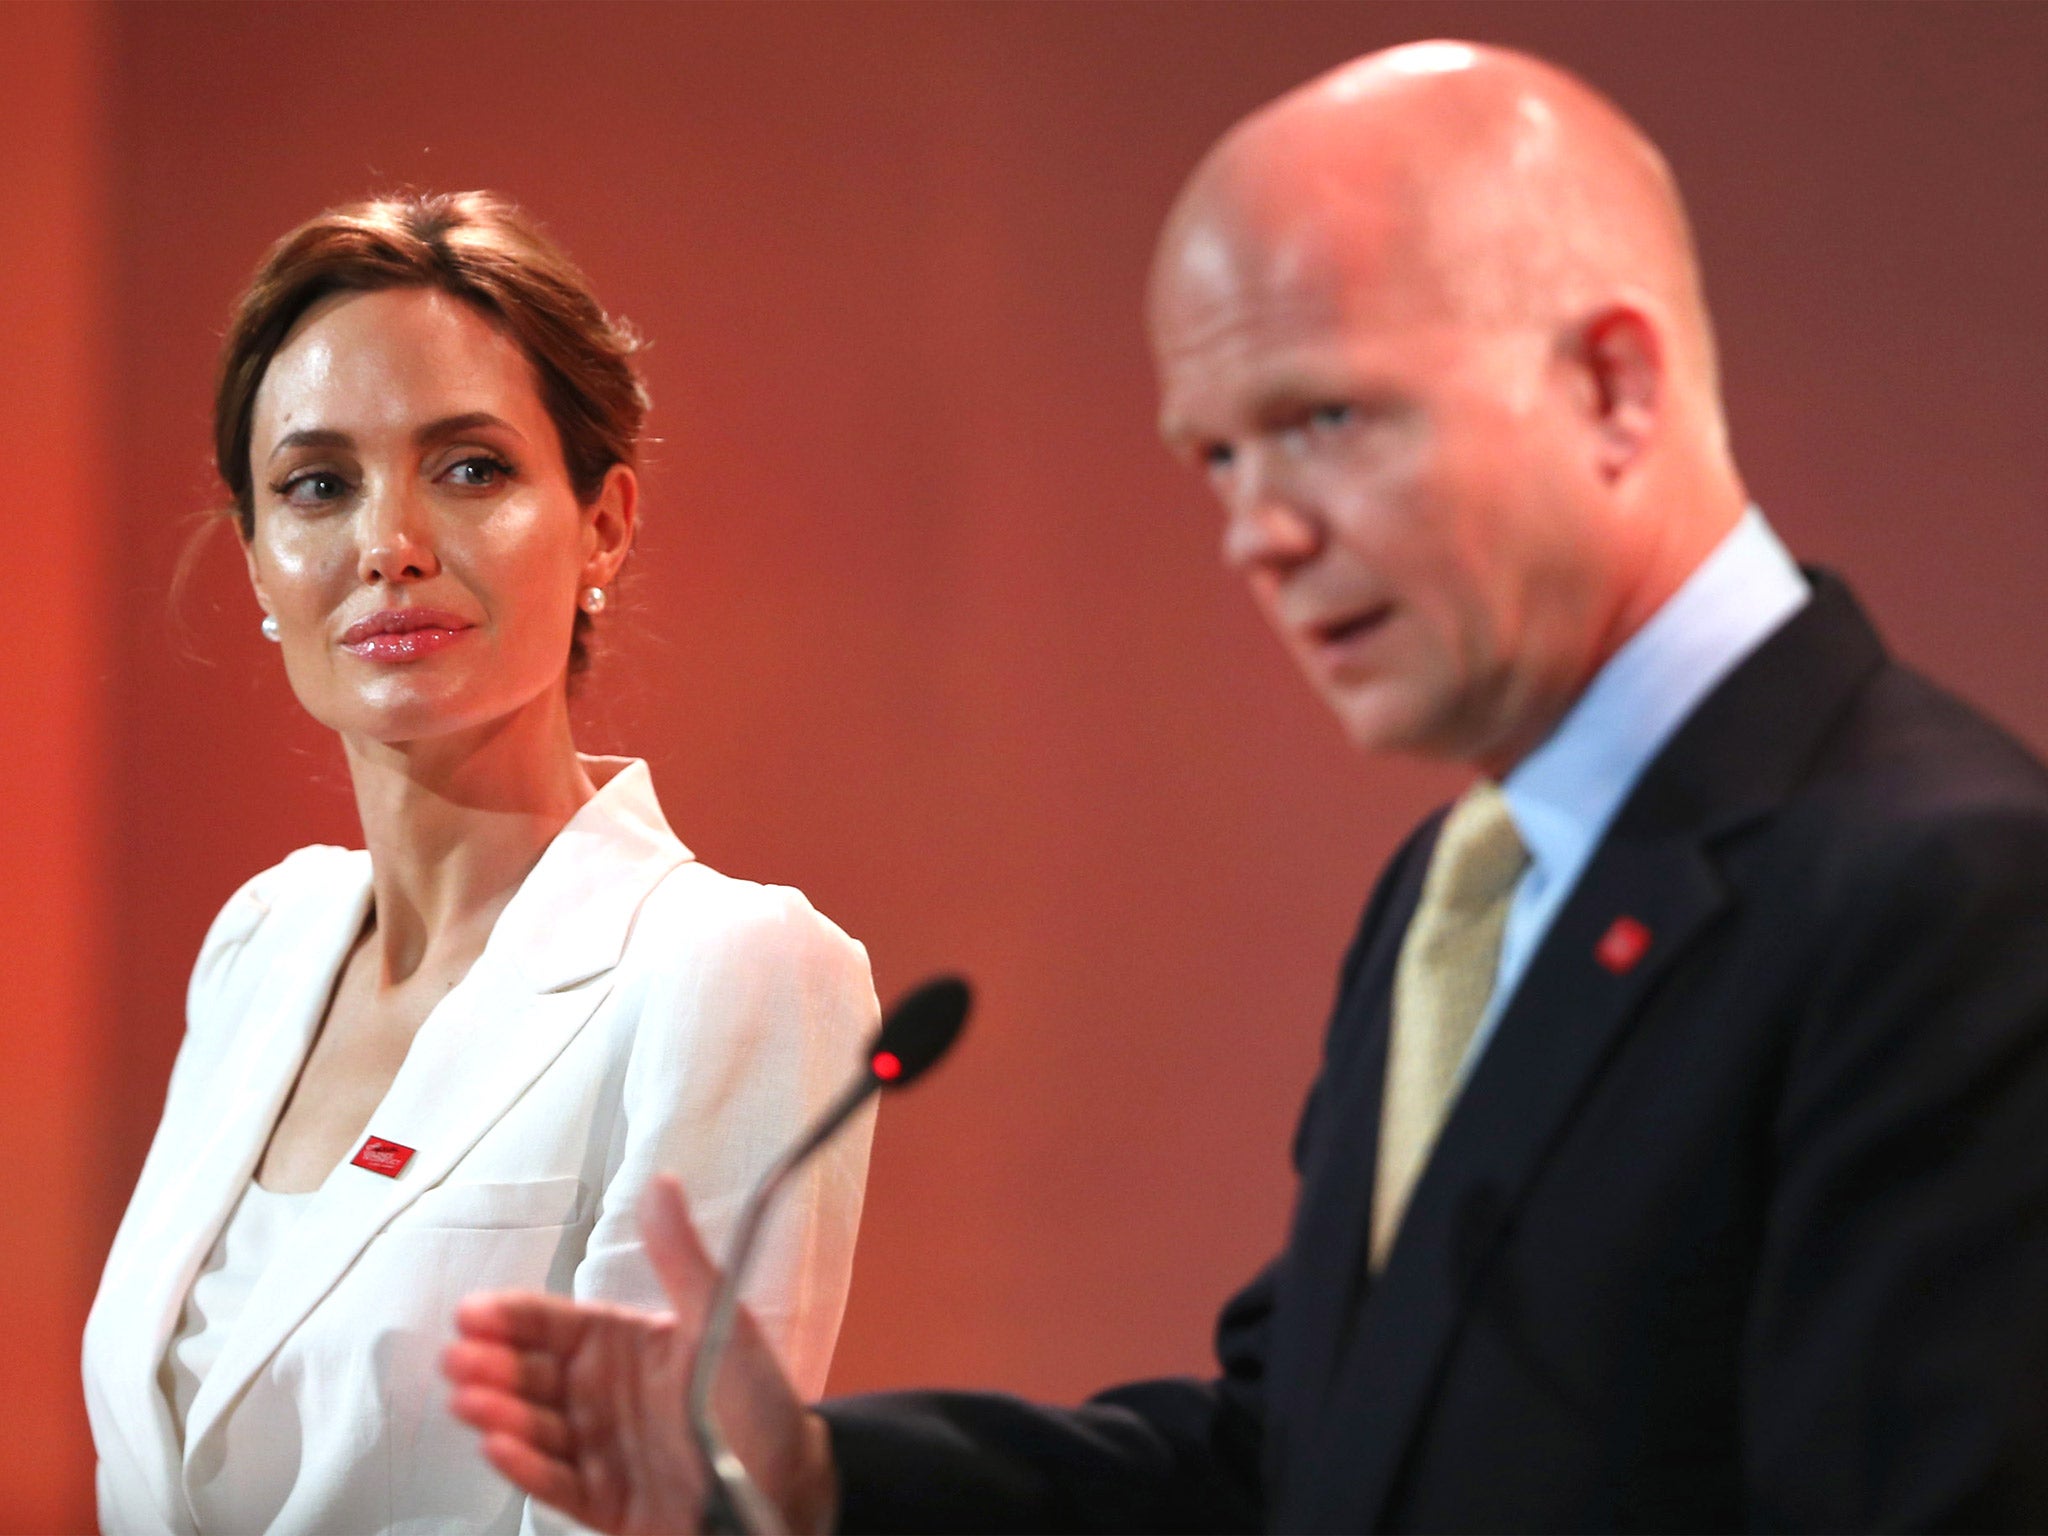 Angelina Jolie and William Hague speak at the Global Summit to End Sexual Violence in Conflict, in London